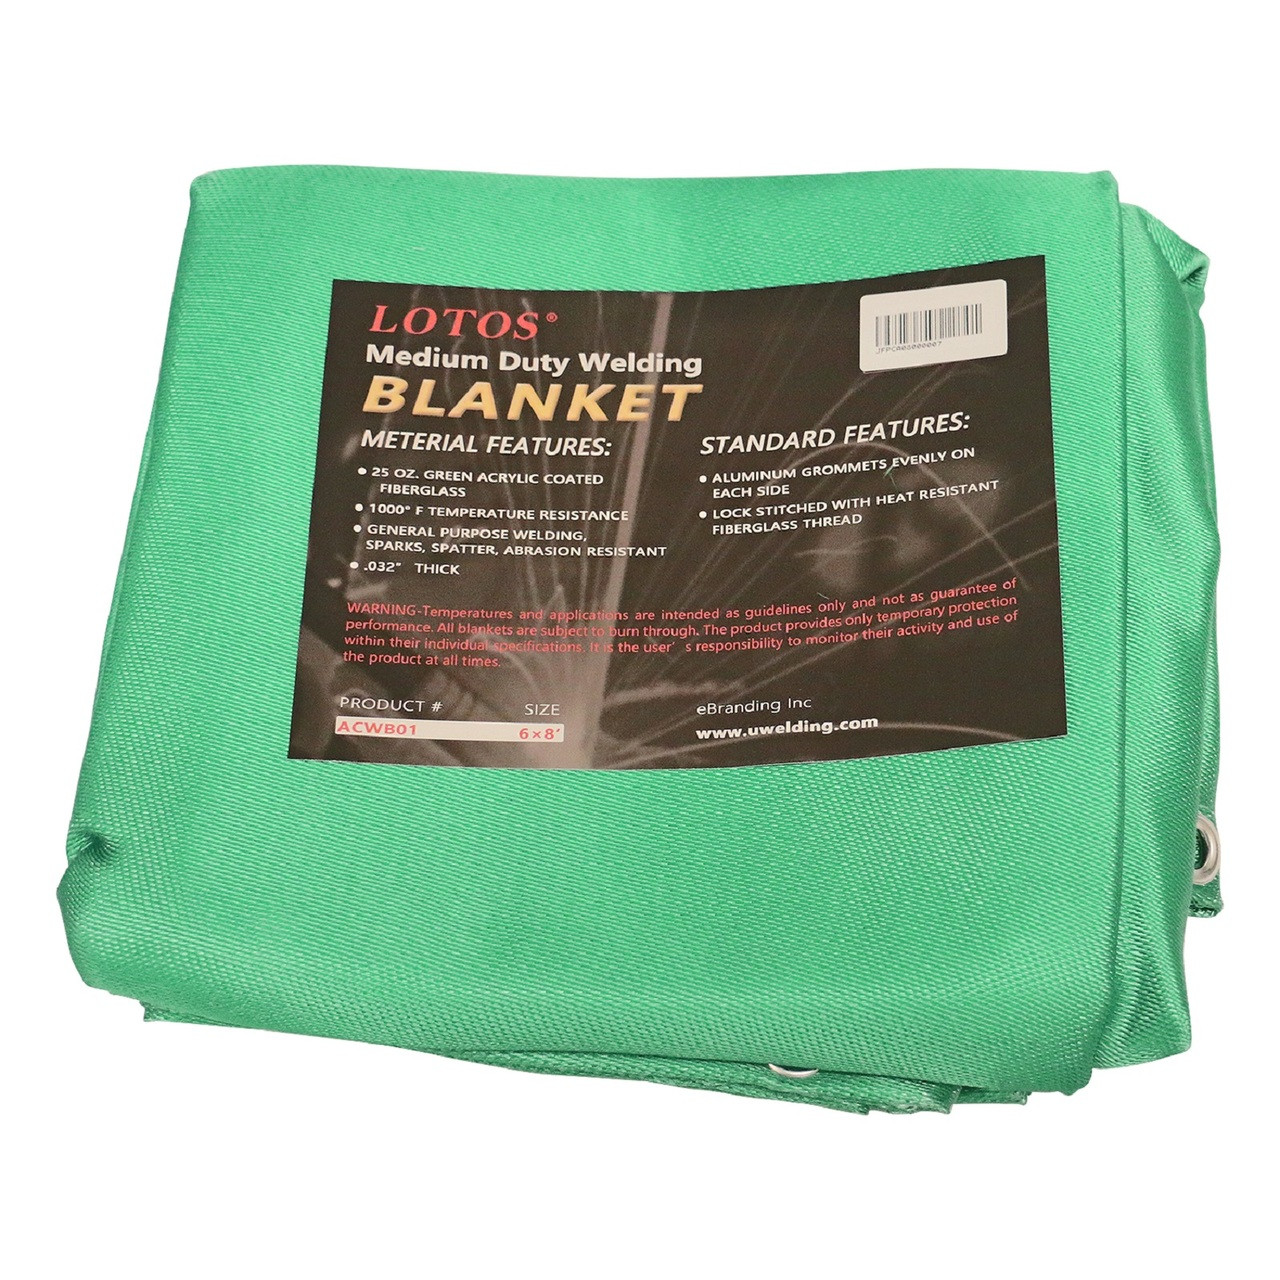 What are the recommendations for the selection of fireproof welding blankets ?